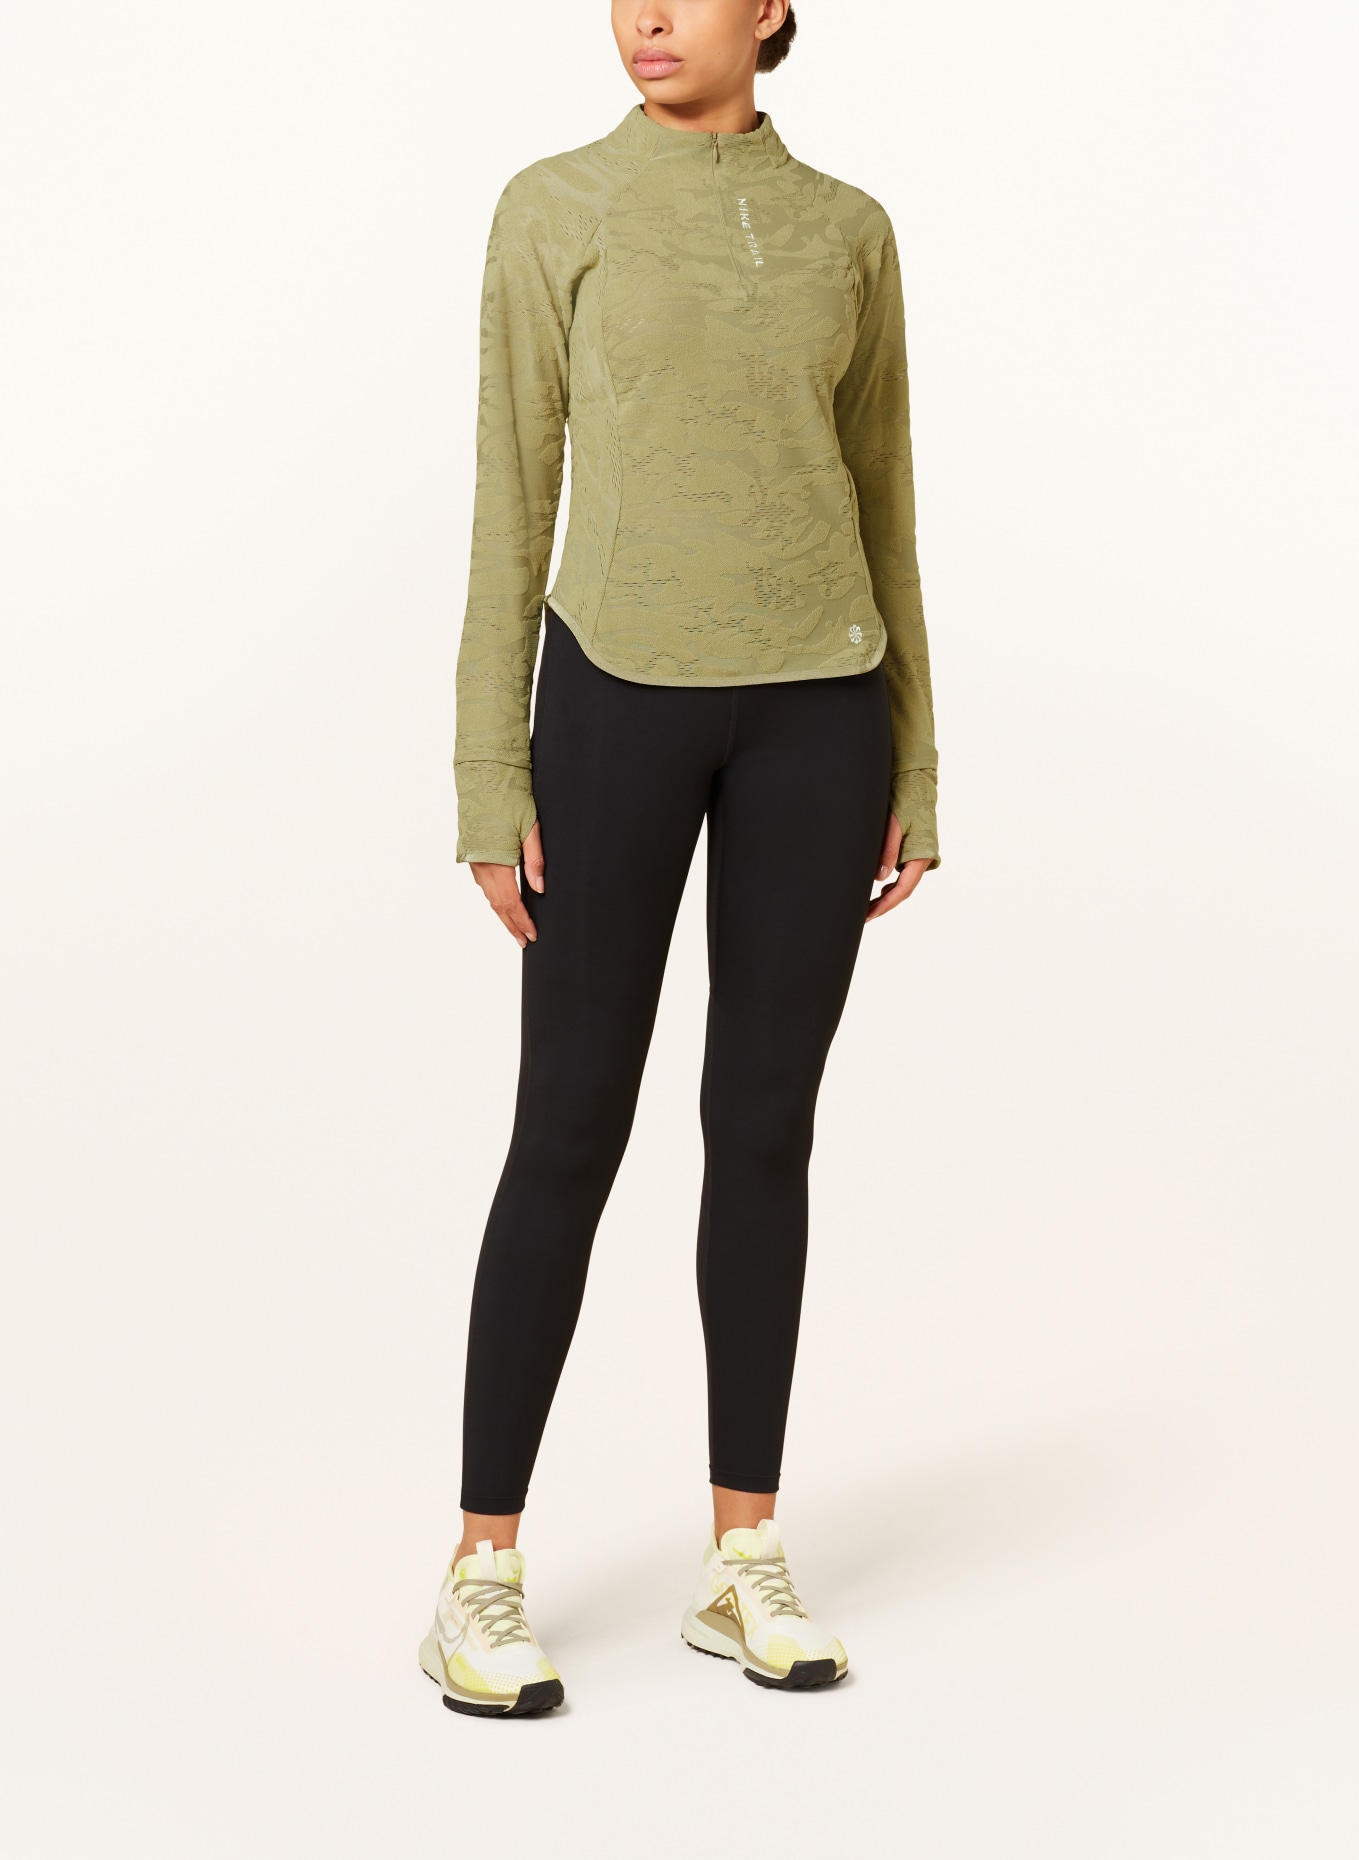 Nike Running shirt DRI-FIT TRAIL, Color: OLIVE (Image 2)